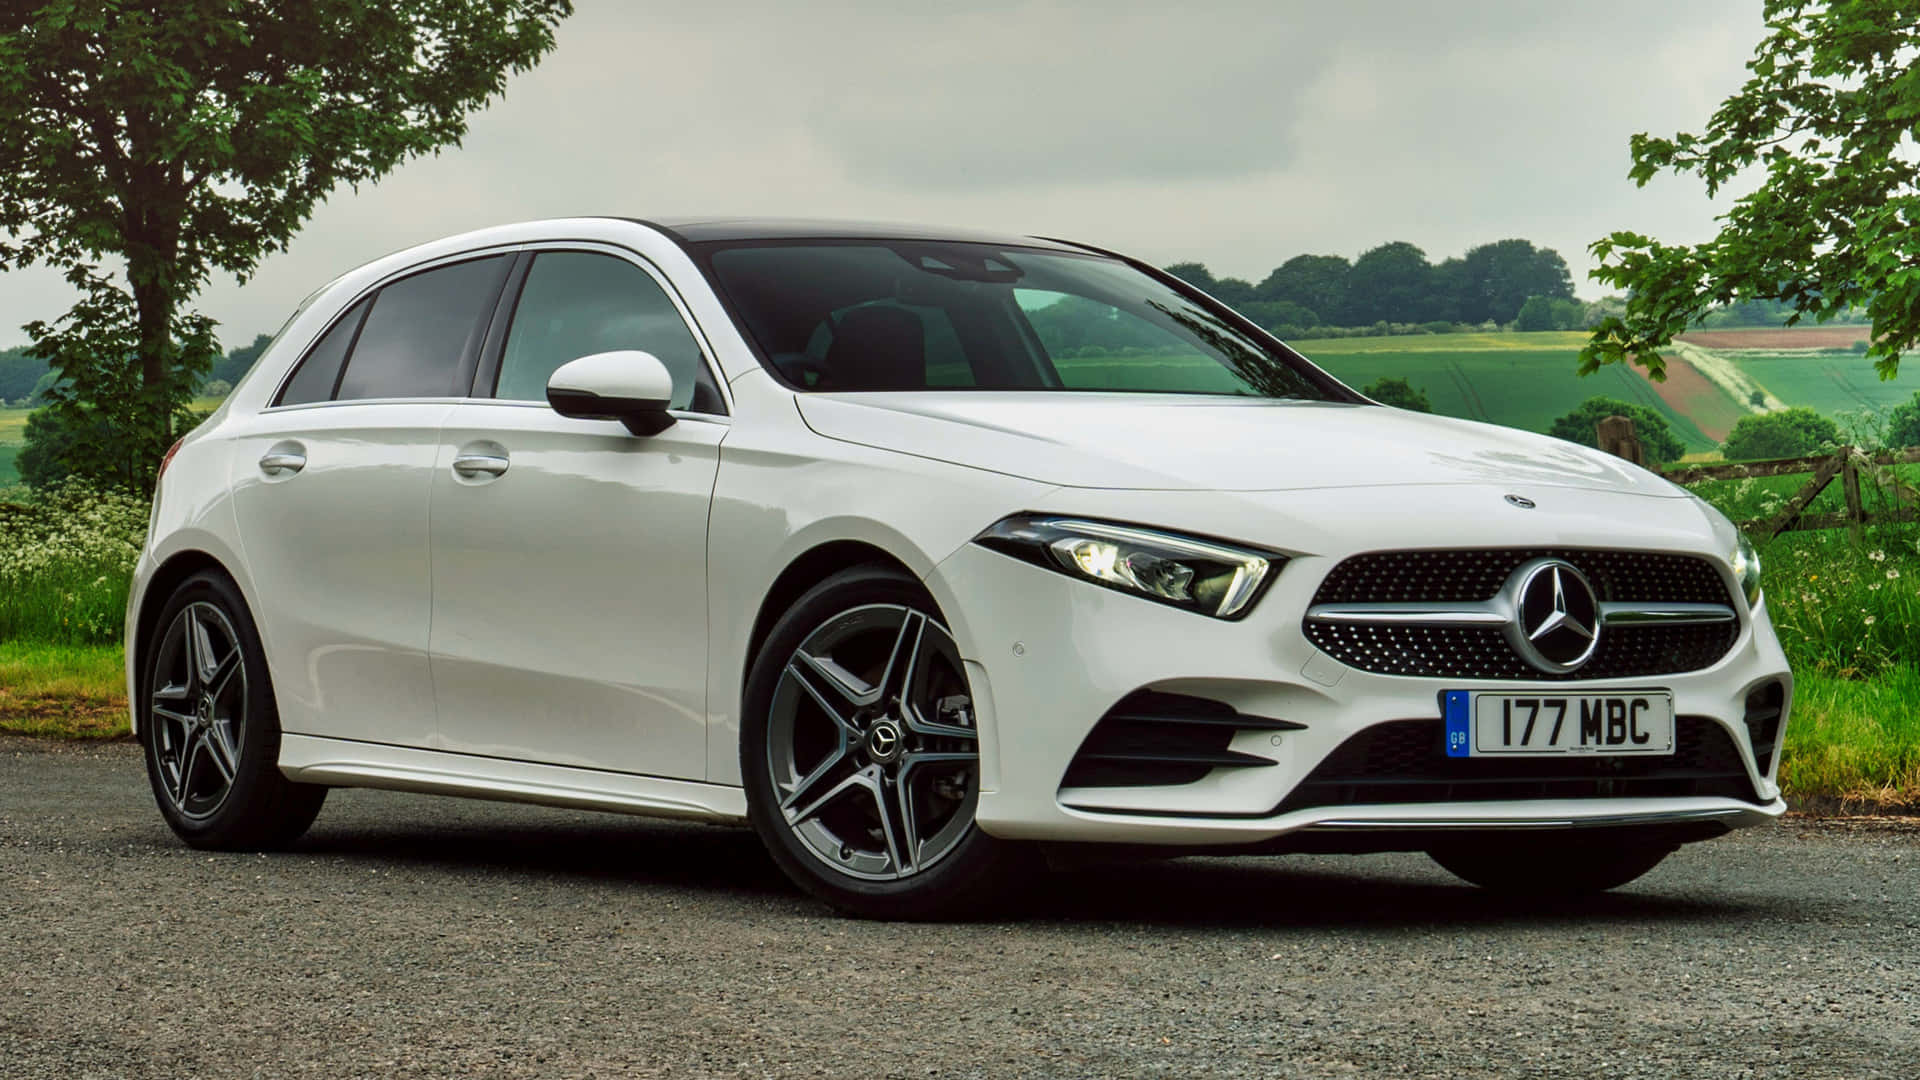 Sleek and Stylish Mercedes Benz A-Class on Display Wallpaper